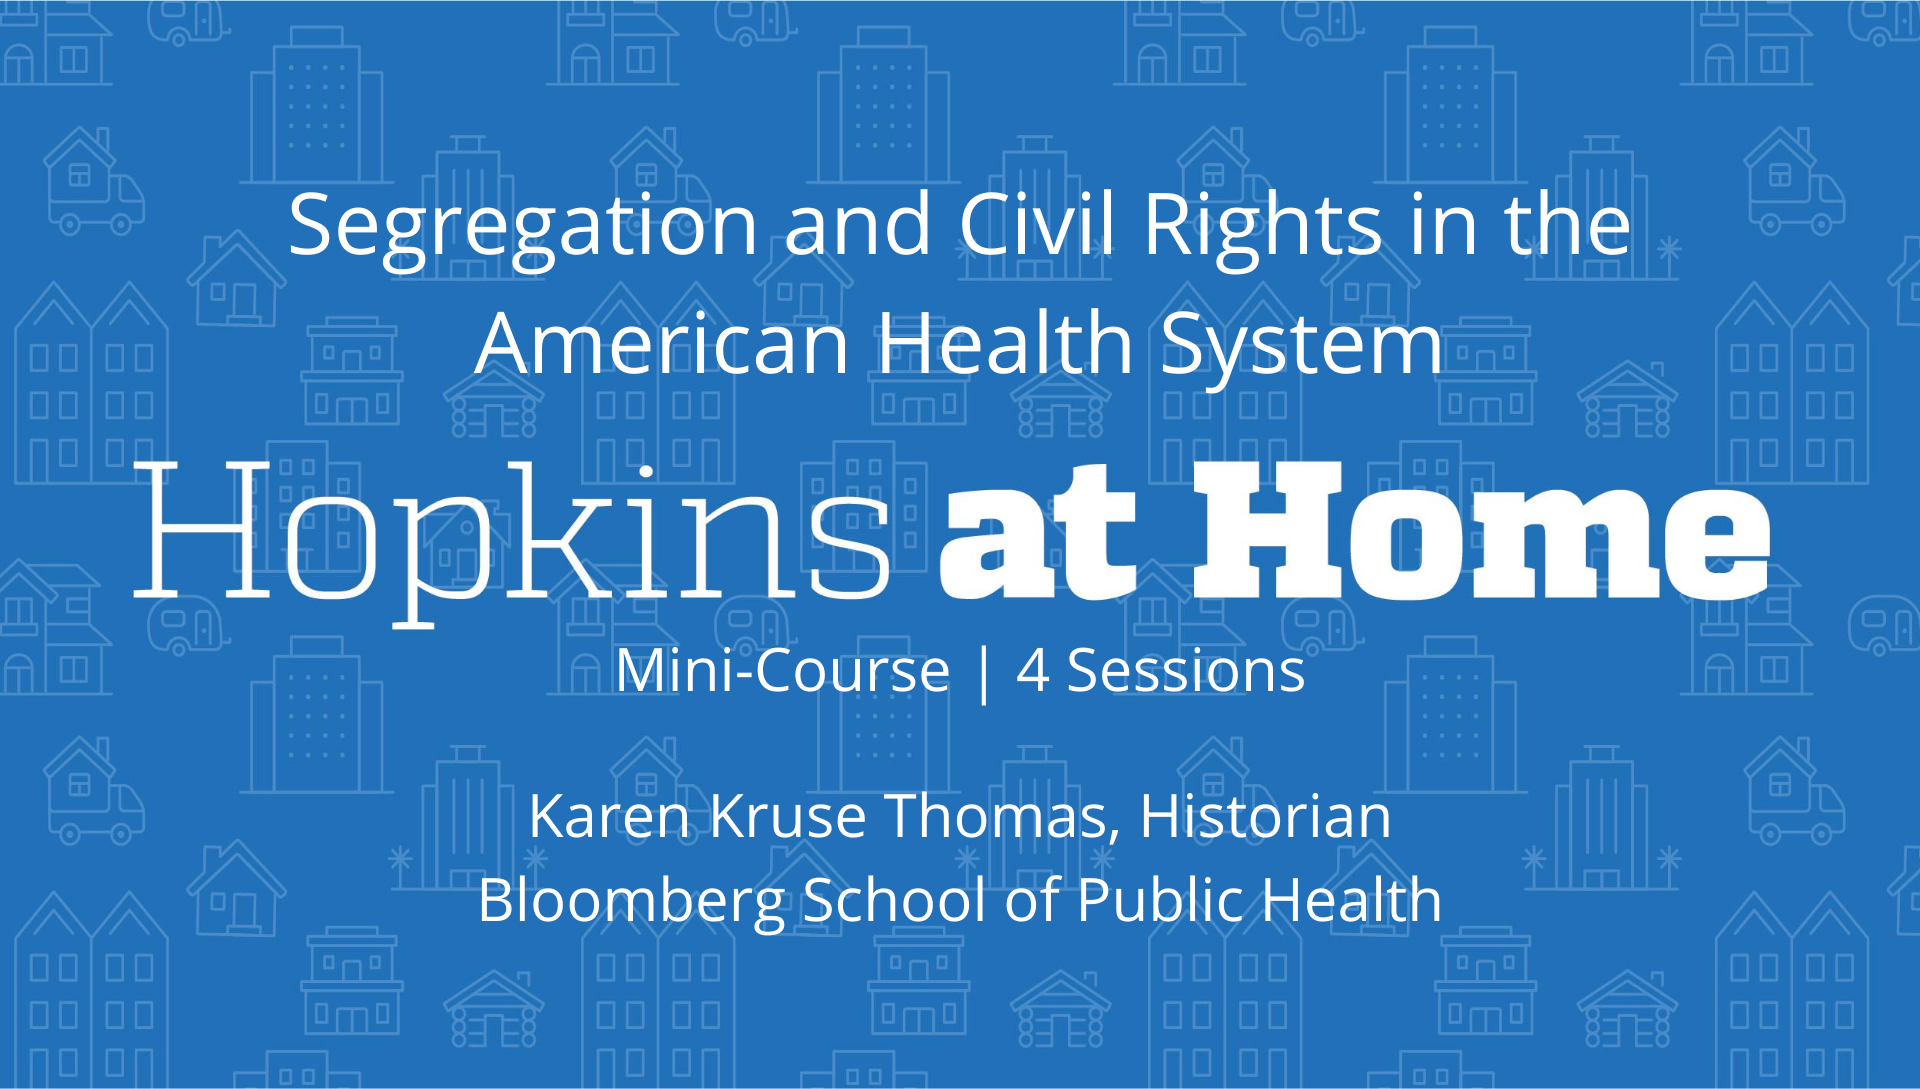 Segregation and Civil Rights in the American Health System